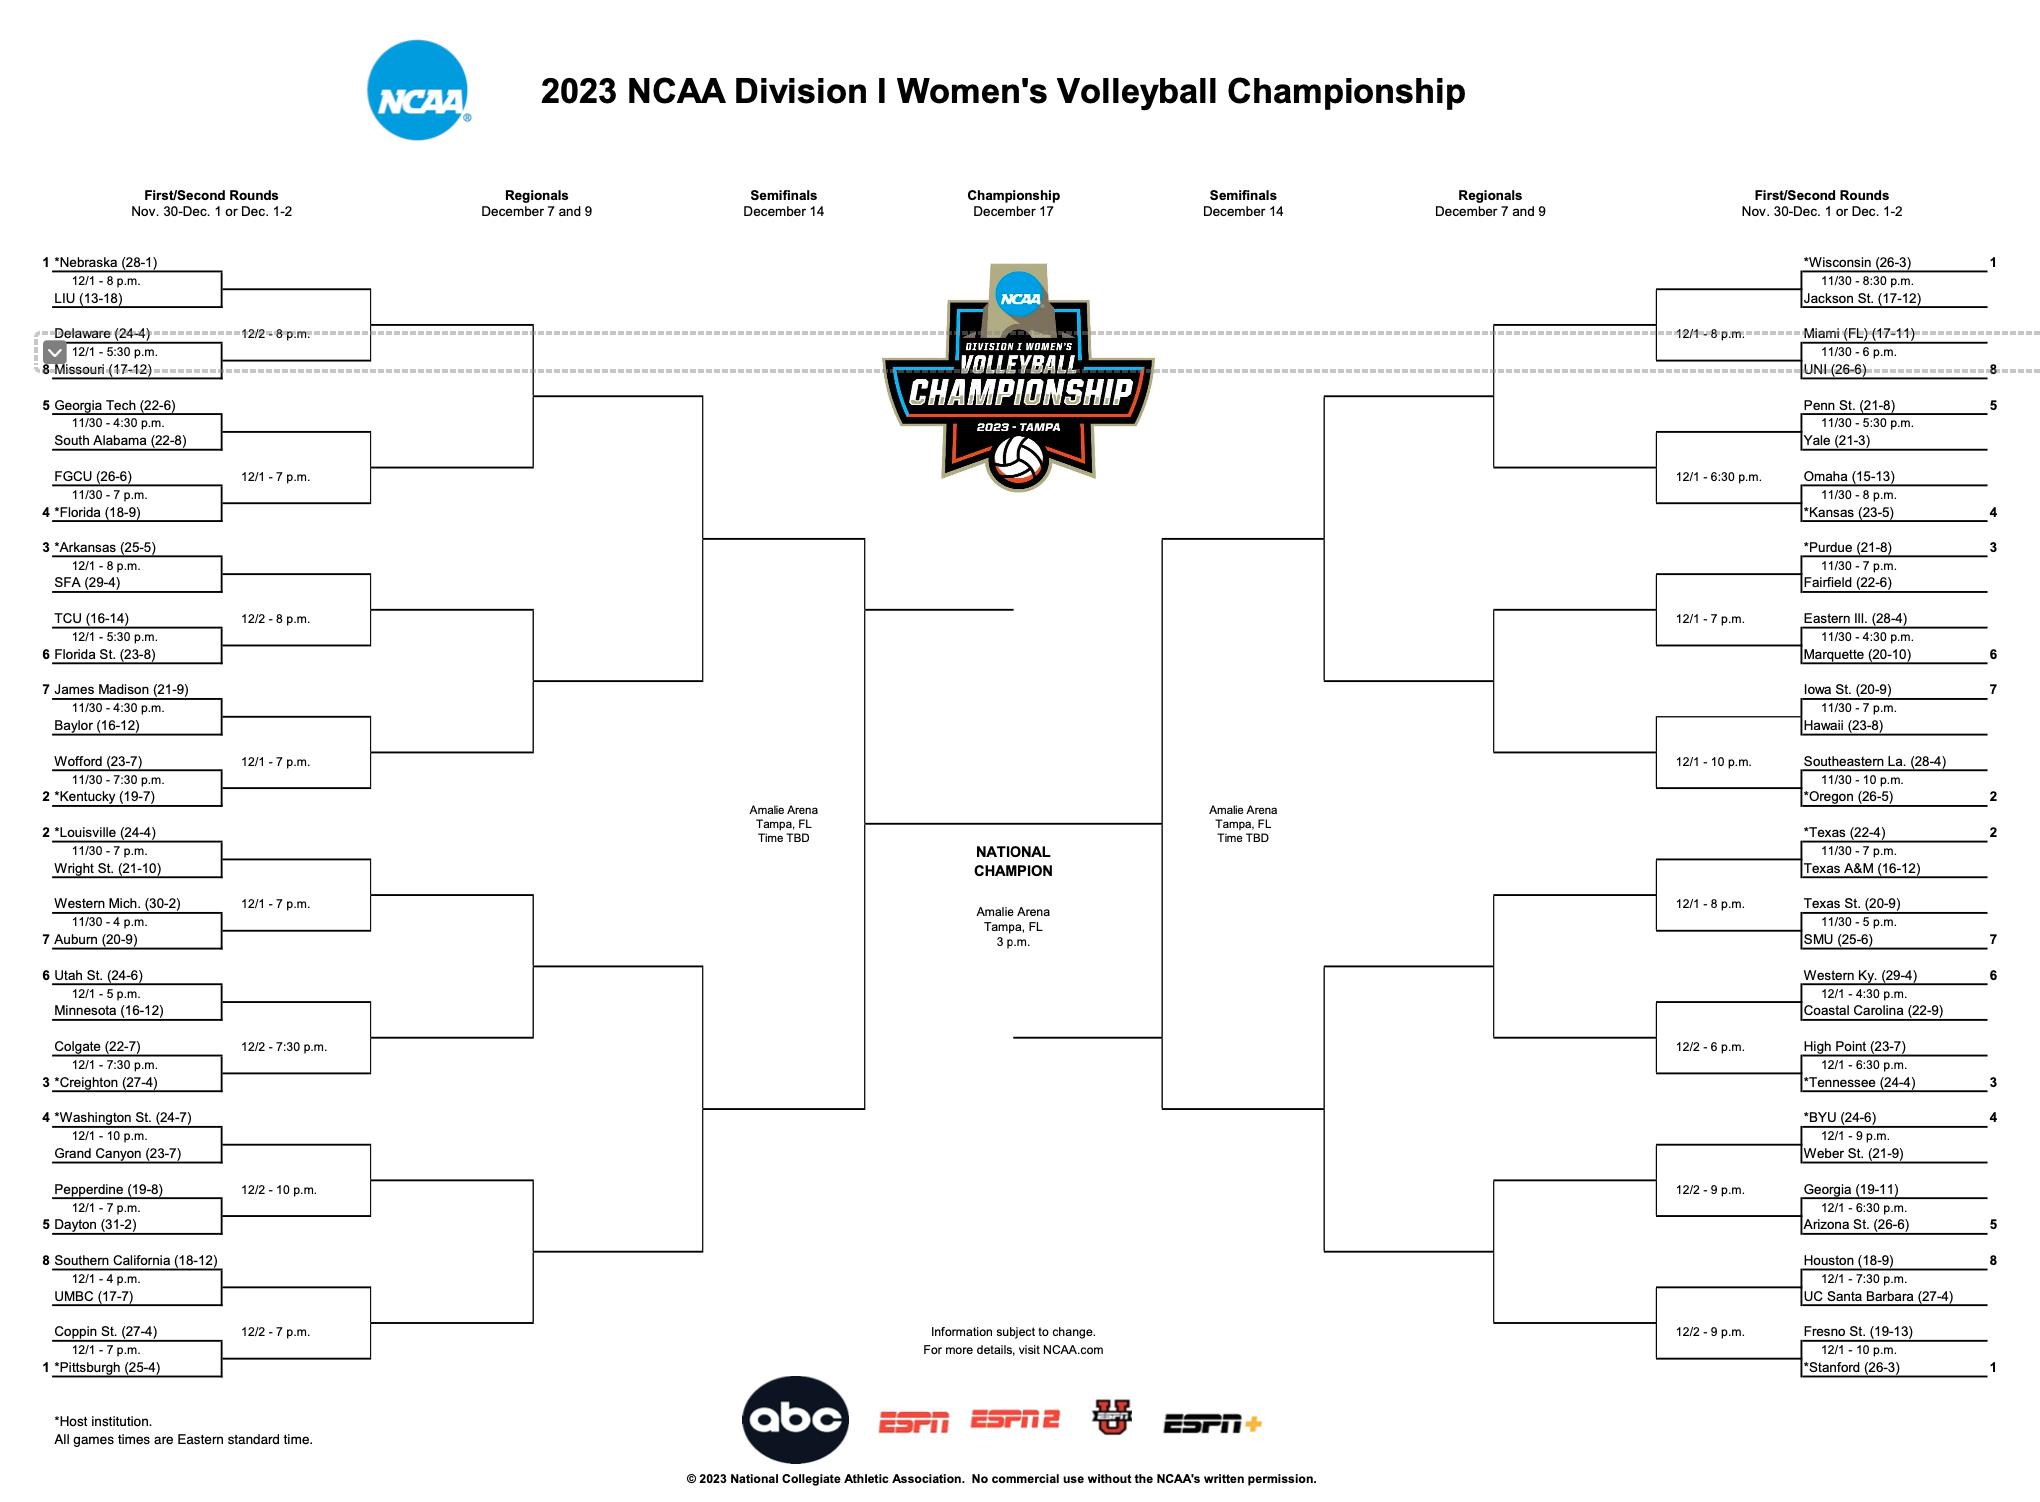 printable-bracket-for-2023-division-1-women-s-volleyball-championship